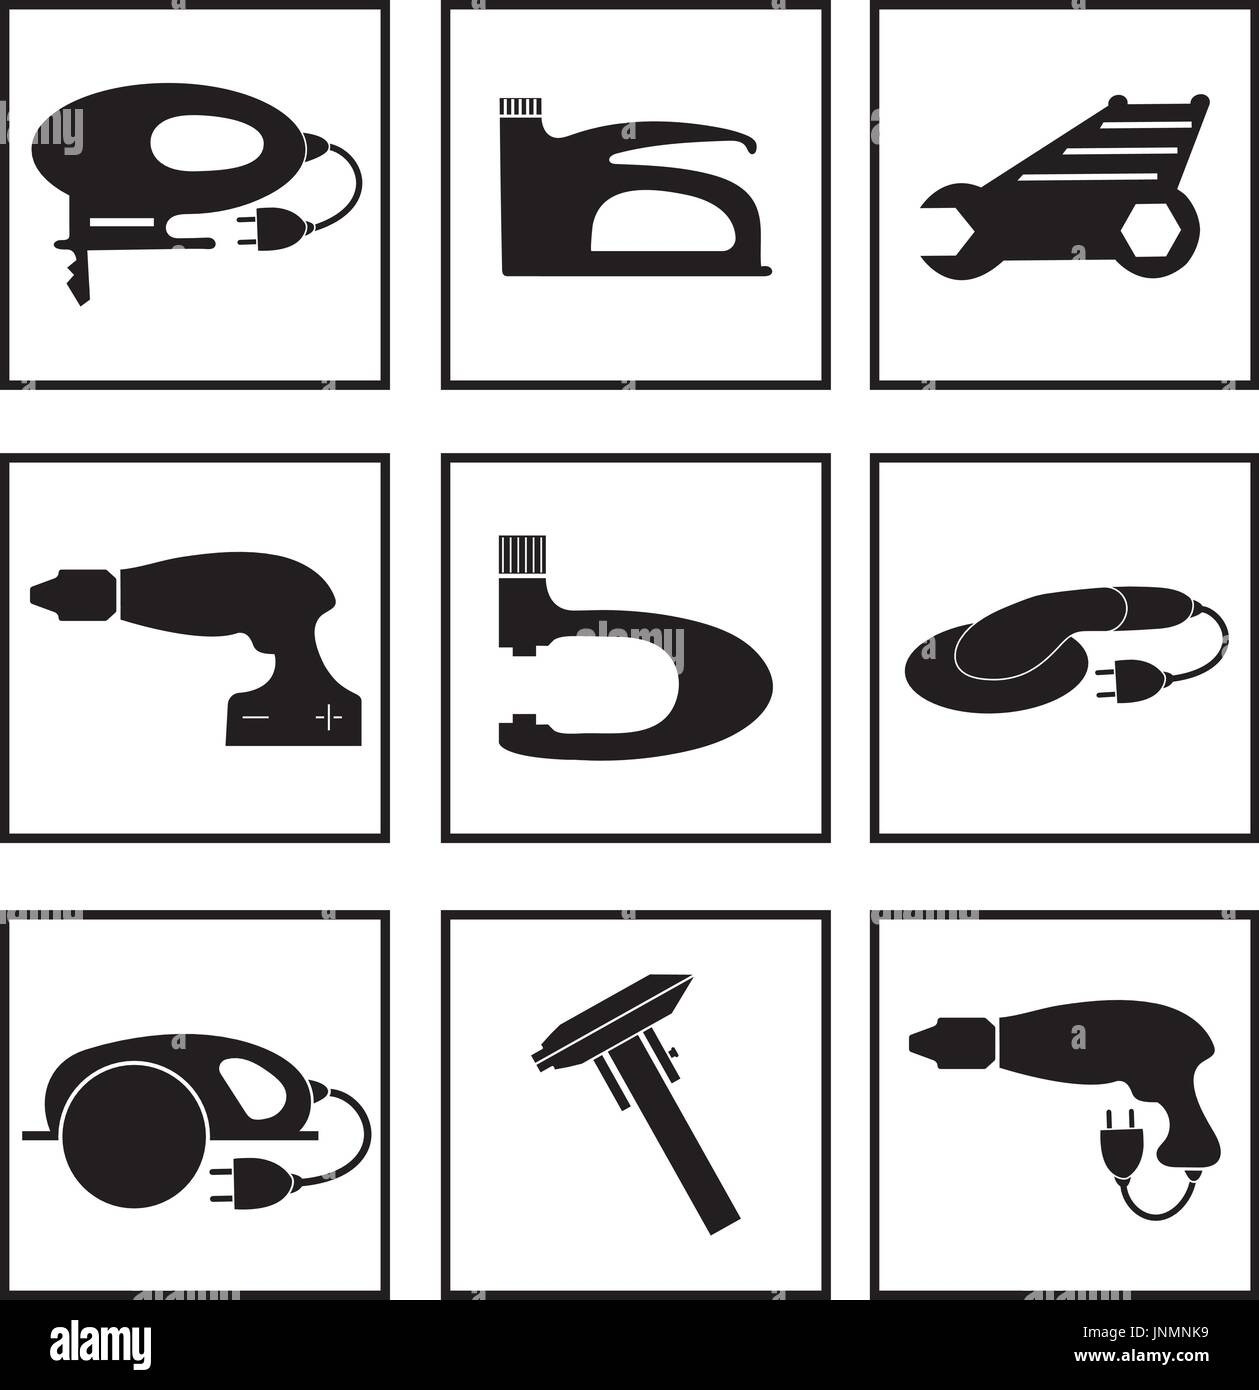 Tools mechanic icons set, black silhouette. Element logo tools, isolated on a white background. Vector illustration. Stock Vector